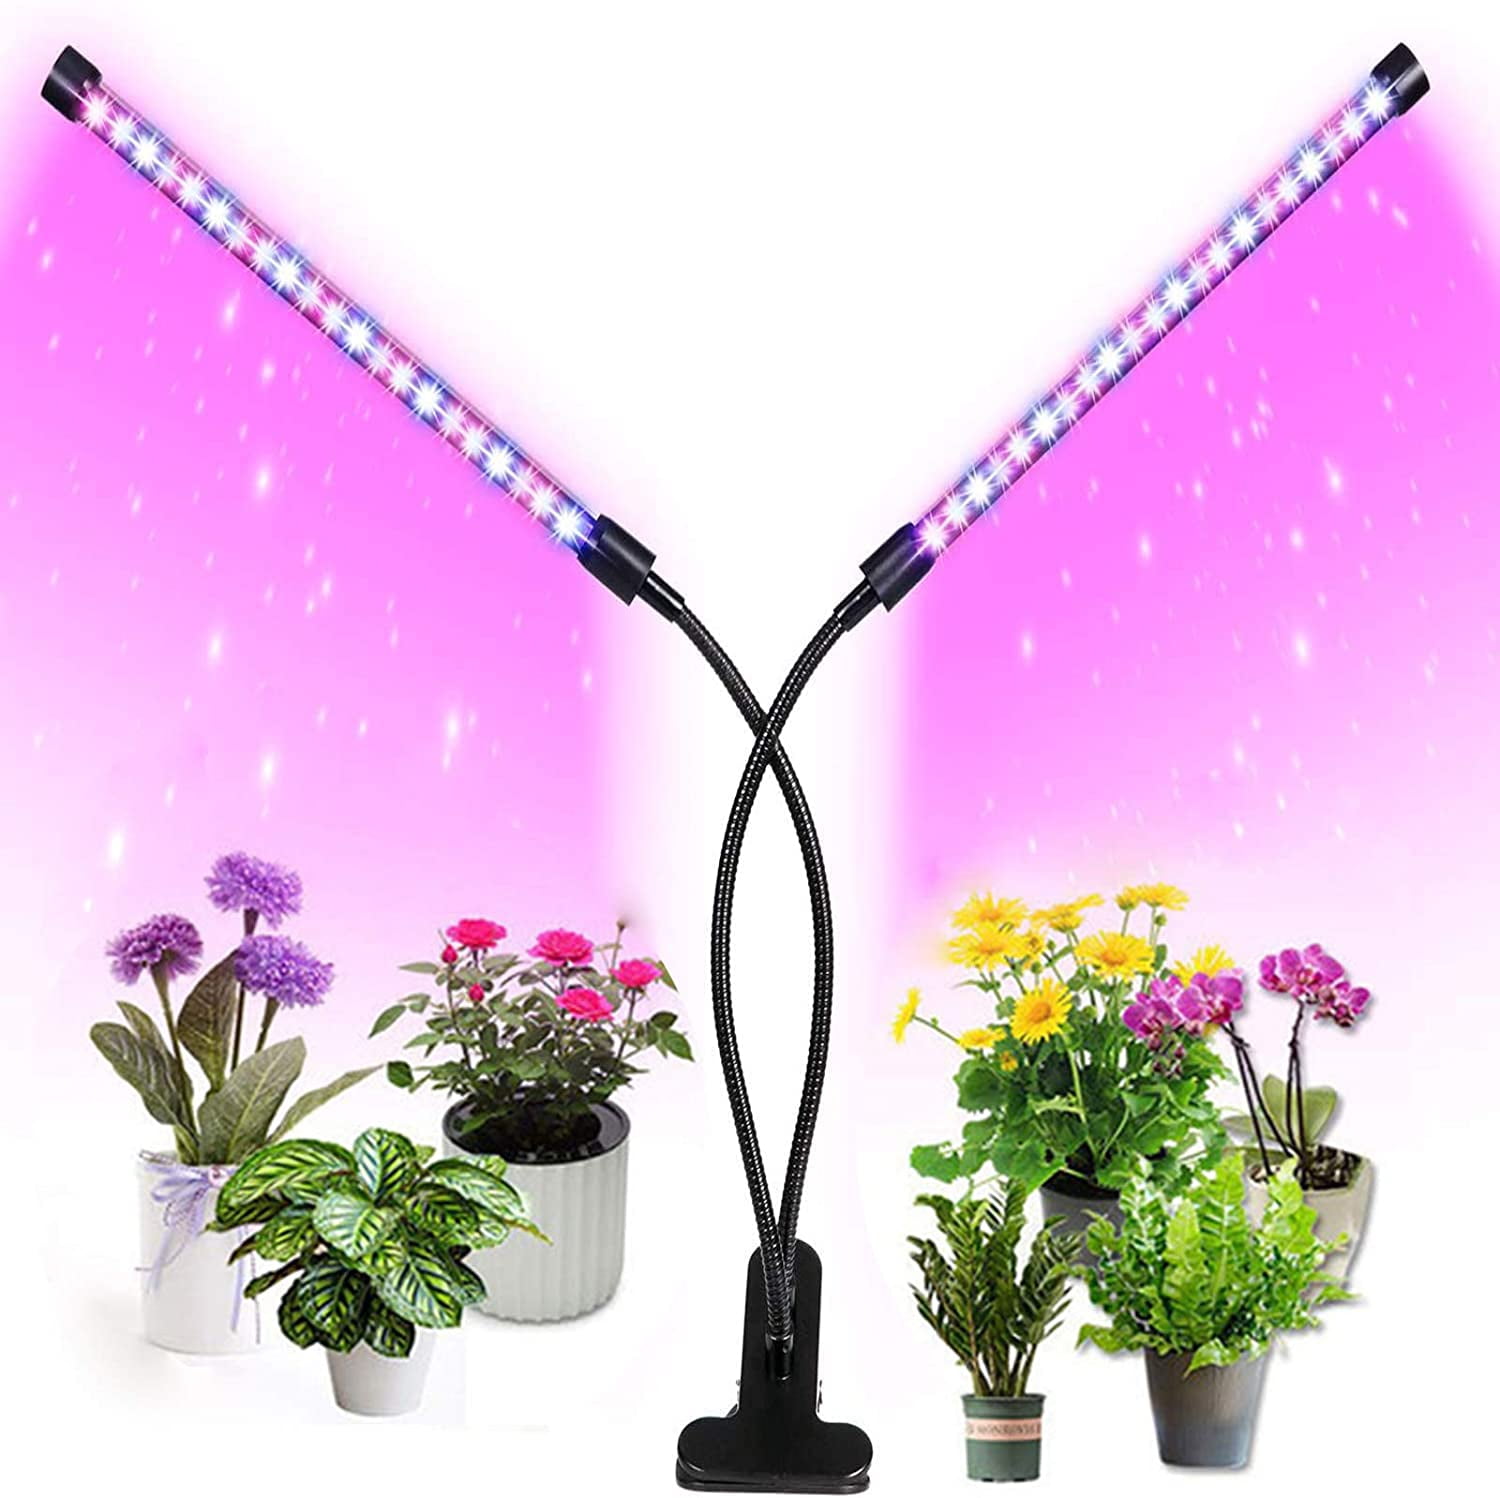 4 Heads LED Grow Light Plant Growing Lamp Lights for Indoor Plants Hydroponics 